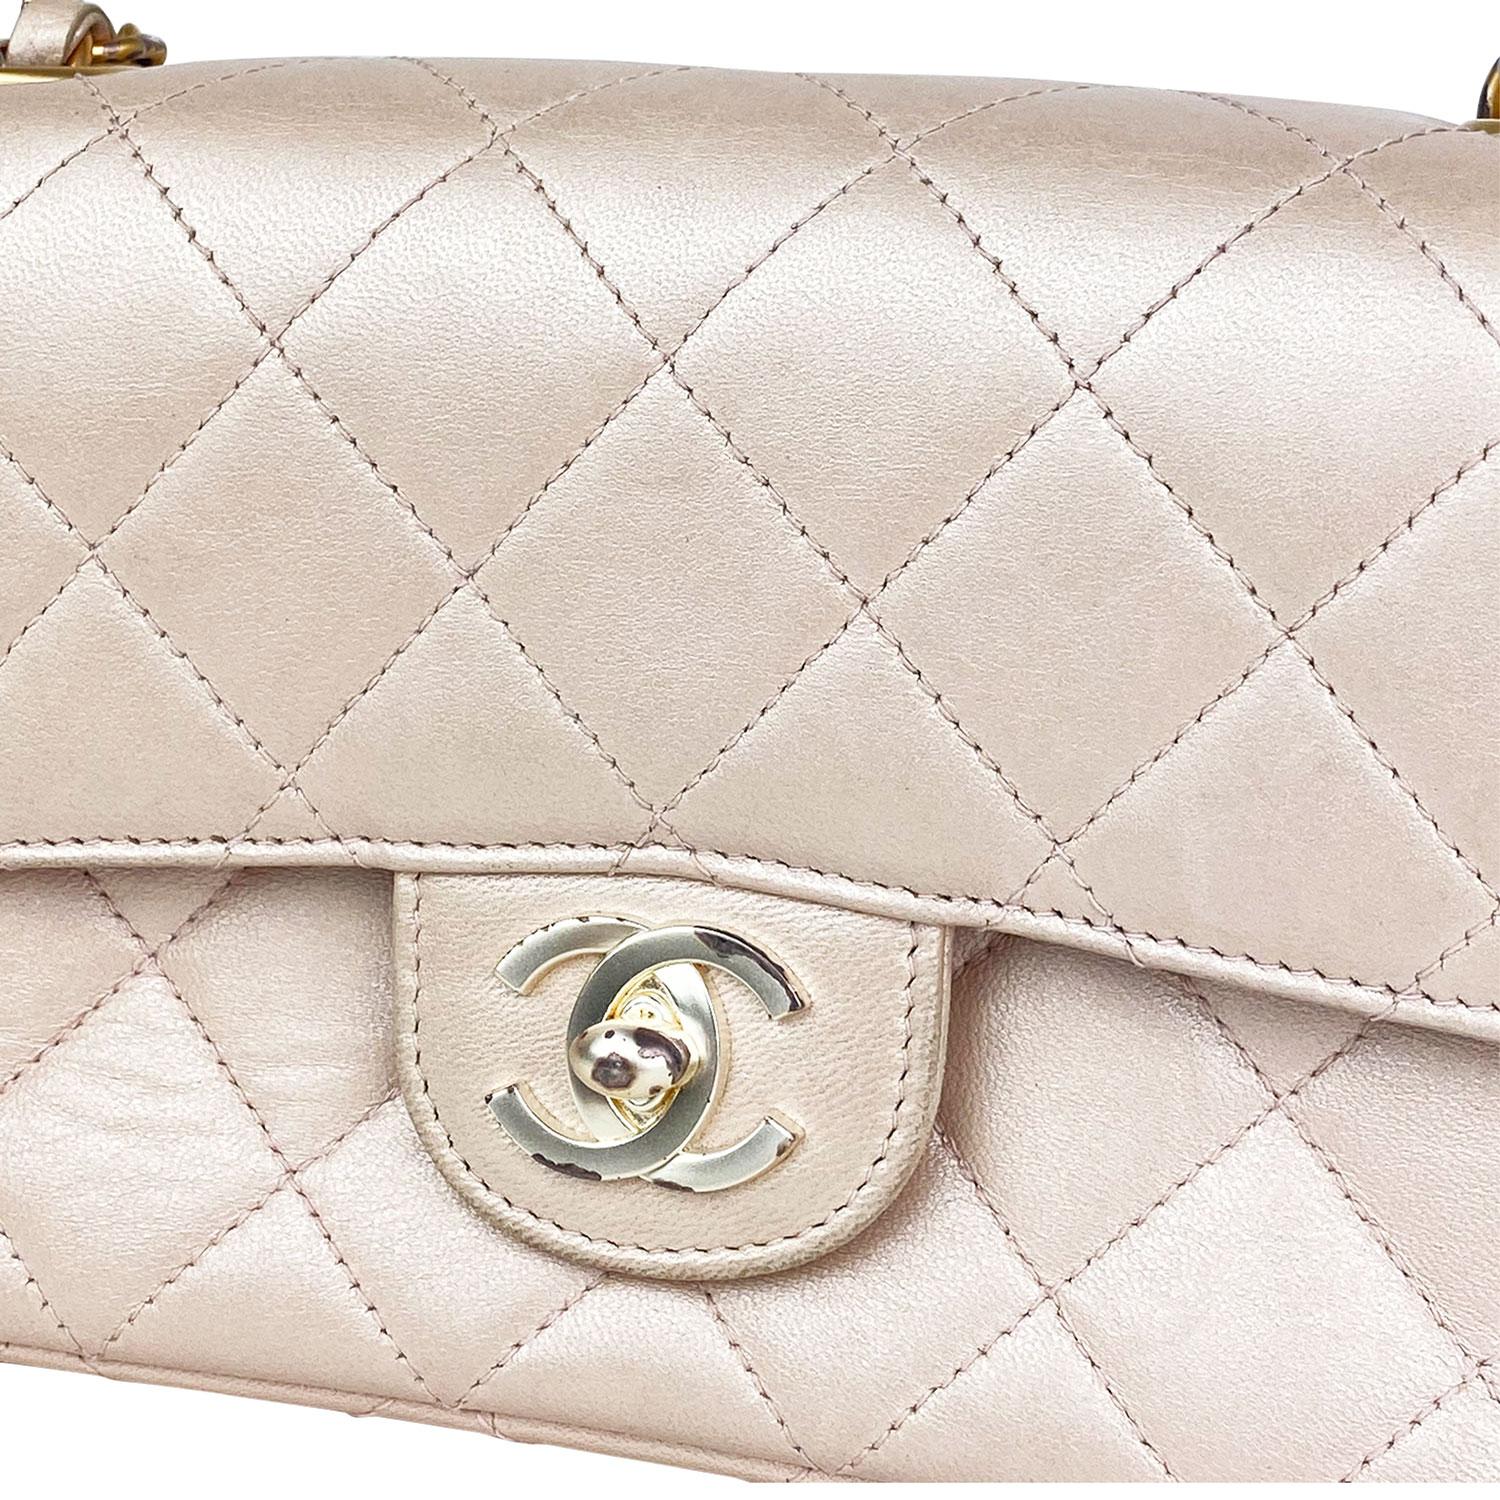 Chanel Classic Mini Rectangular Flap Bag In Good Condition For Sale In Sundbyberg, SE